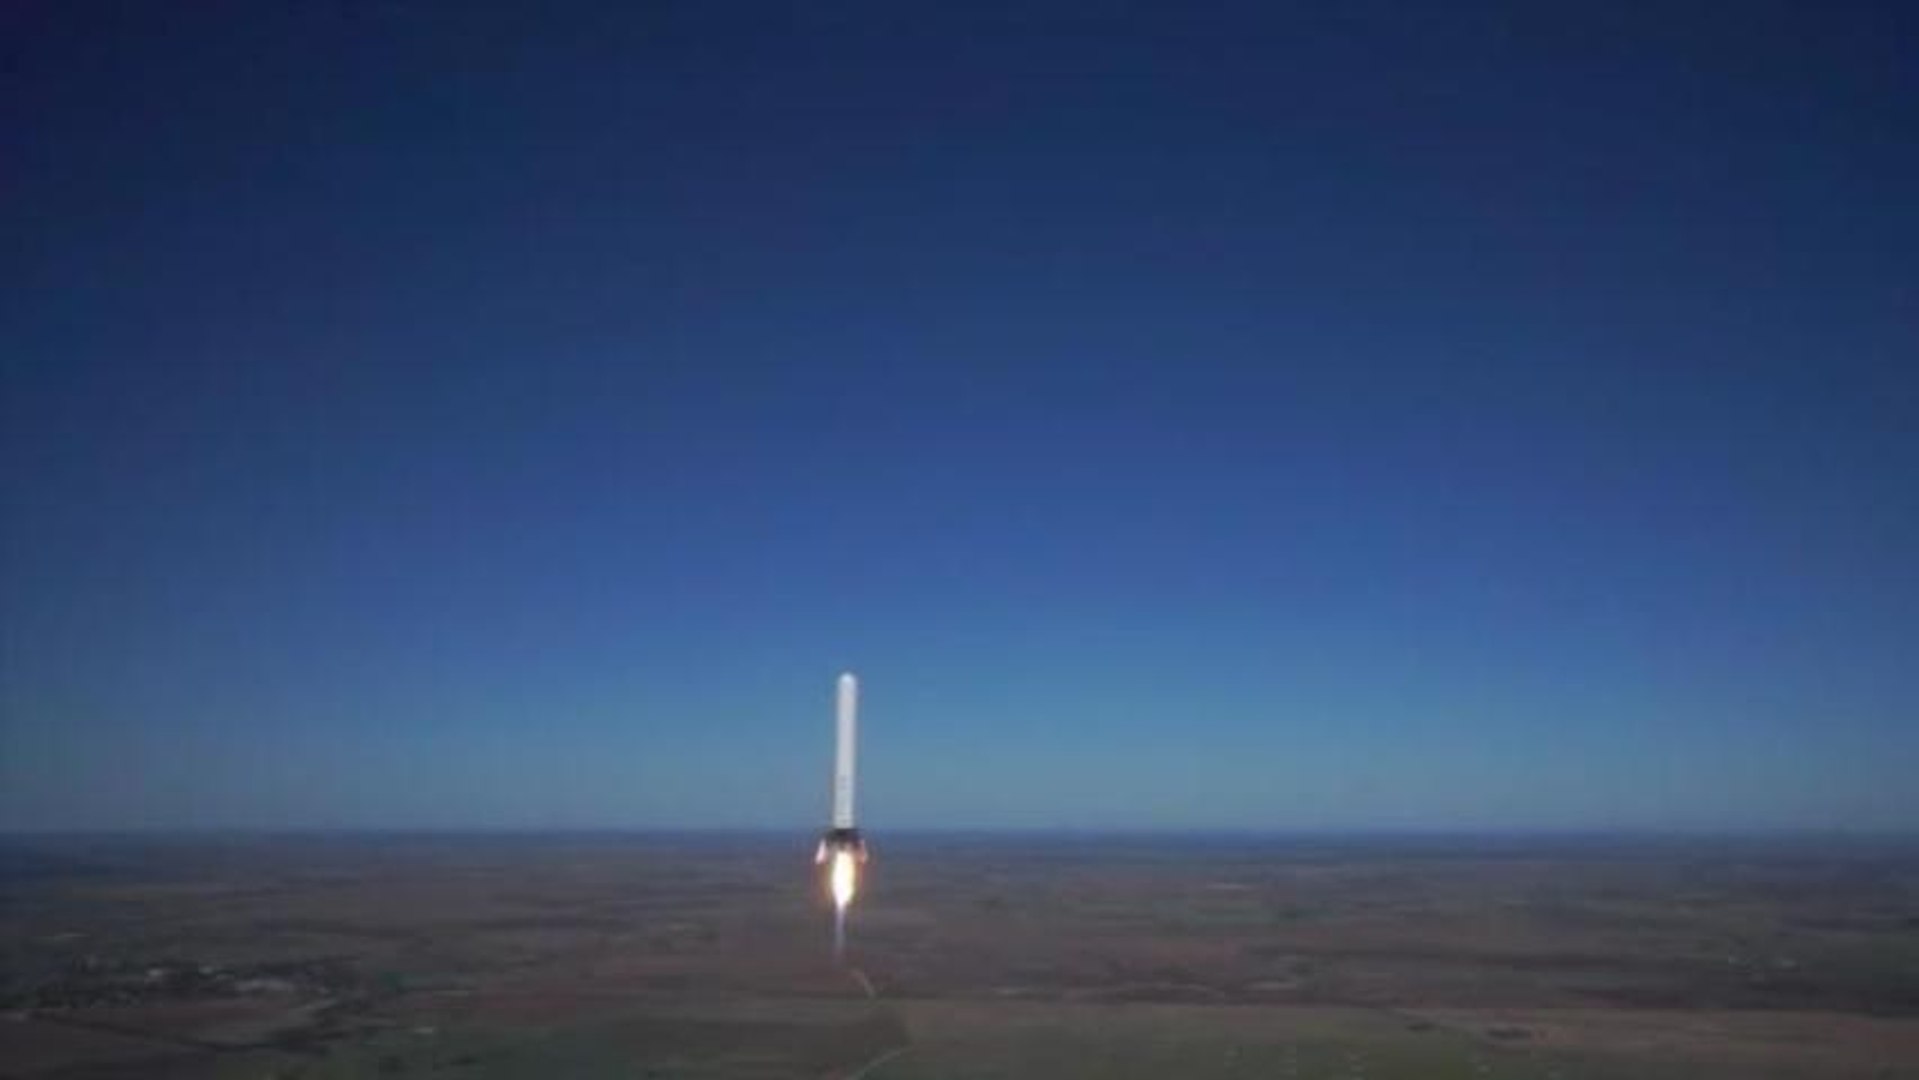 SpaceX Grasshopper Rocket Launch Sets New Record